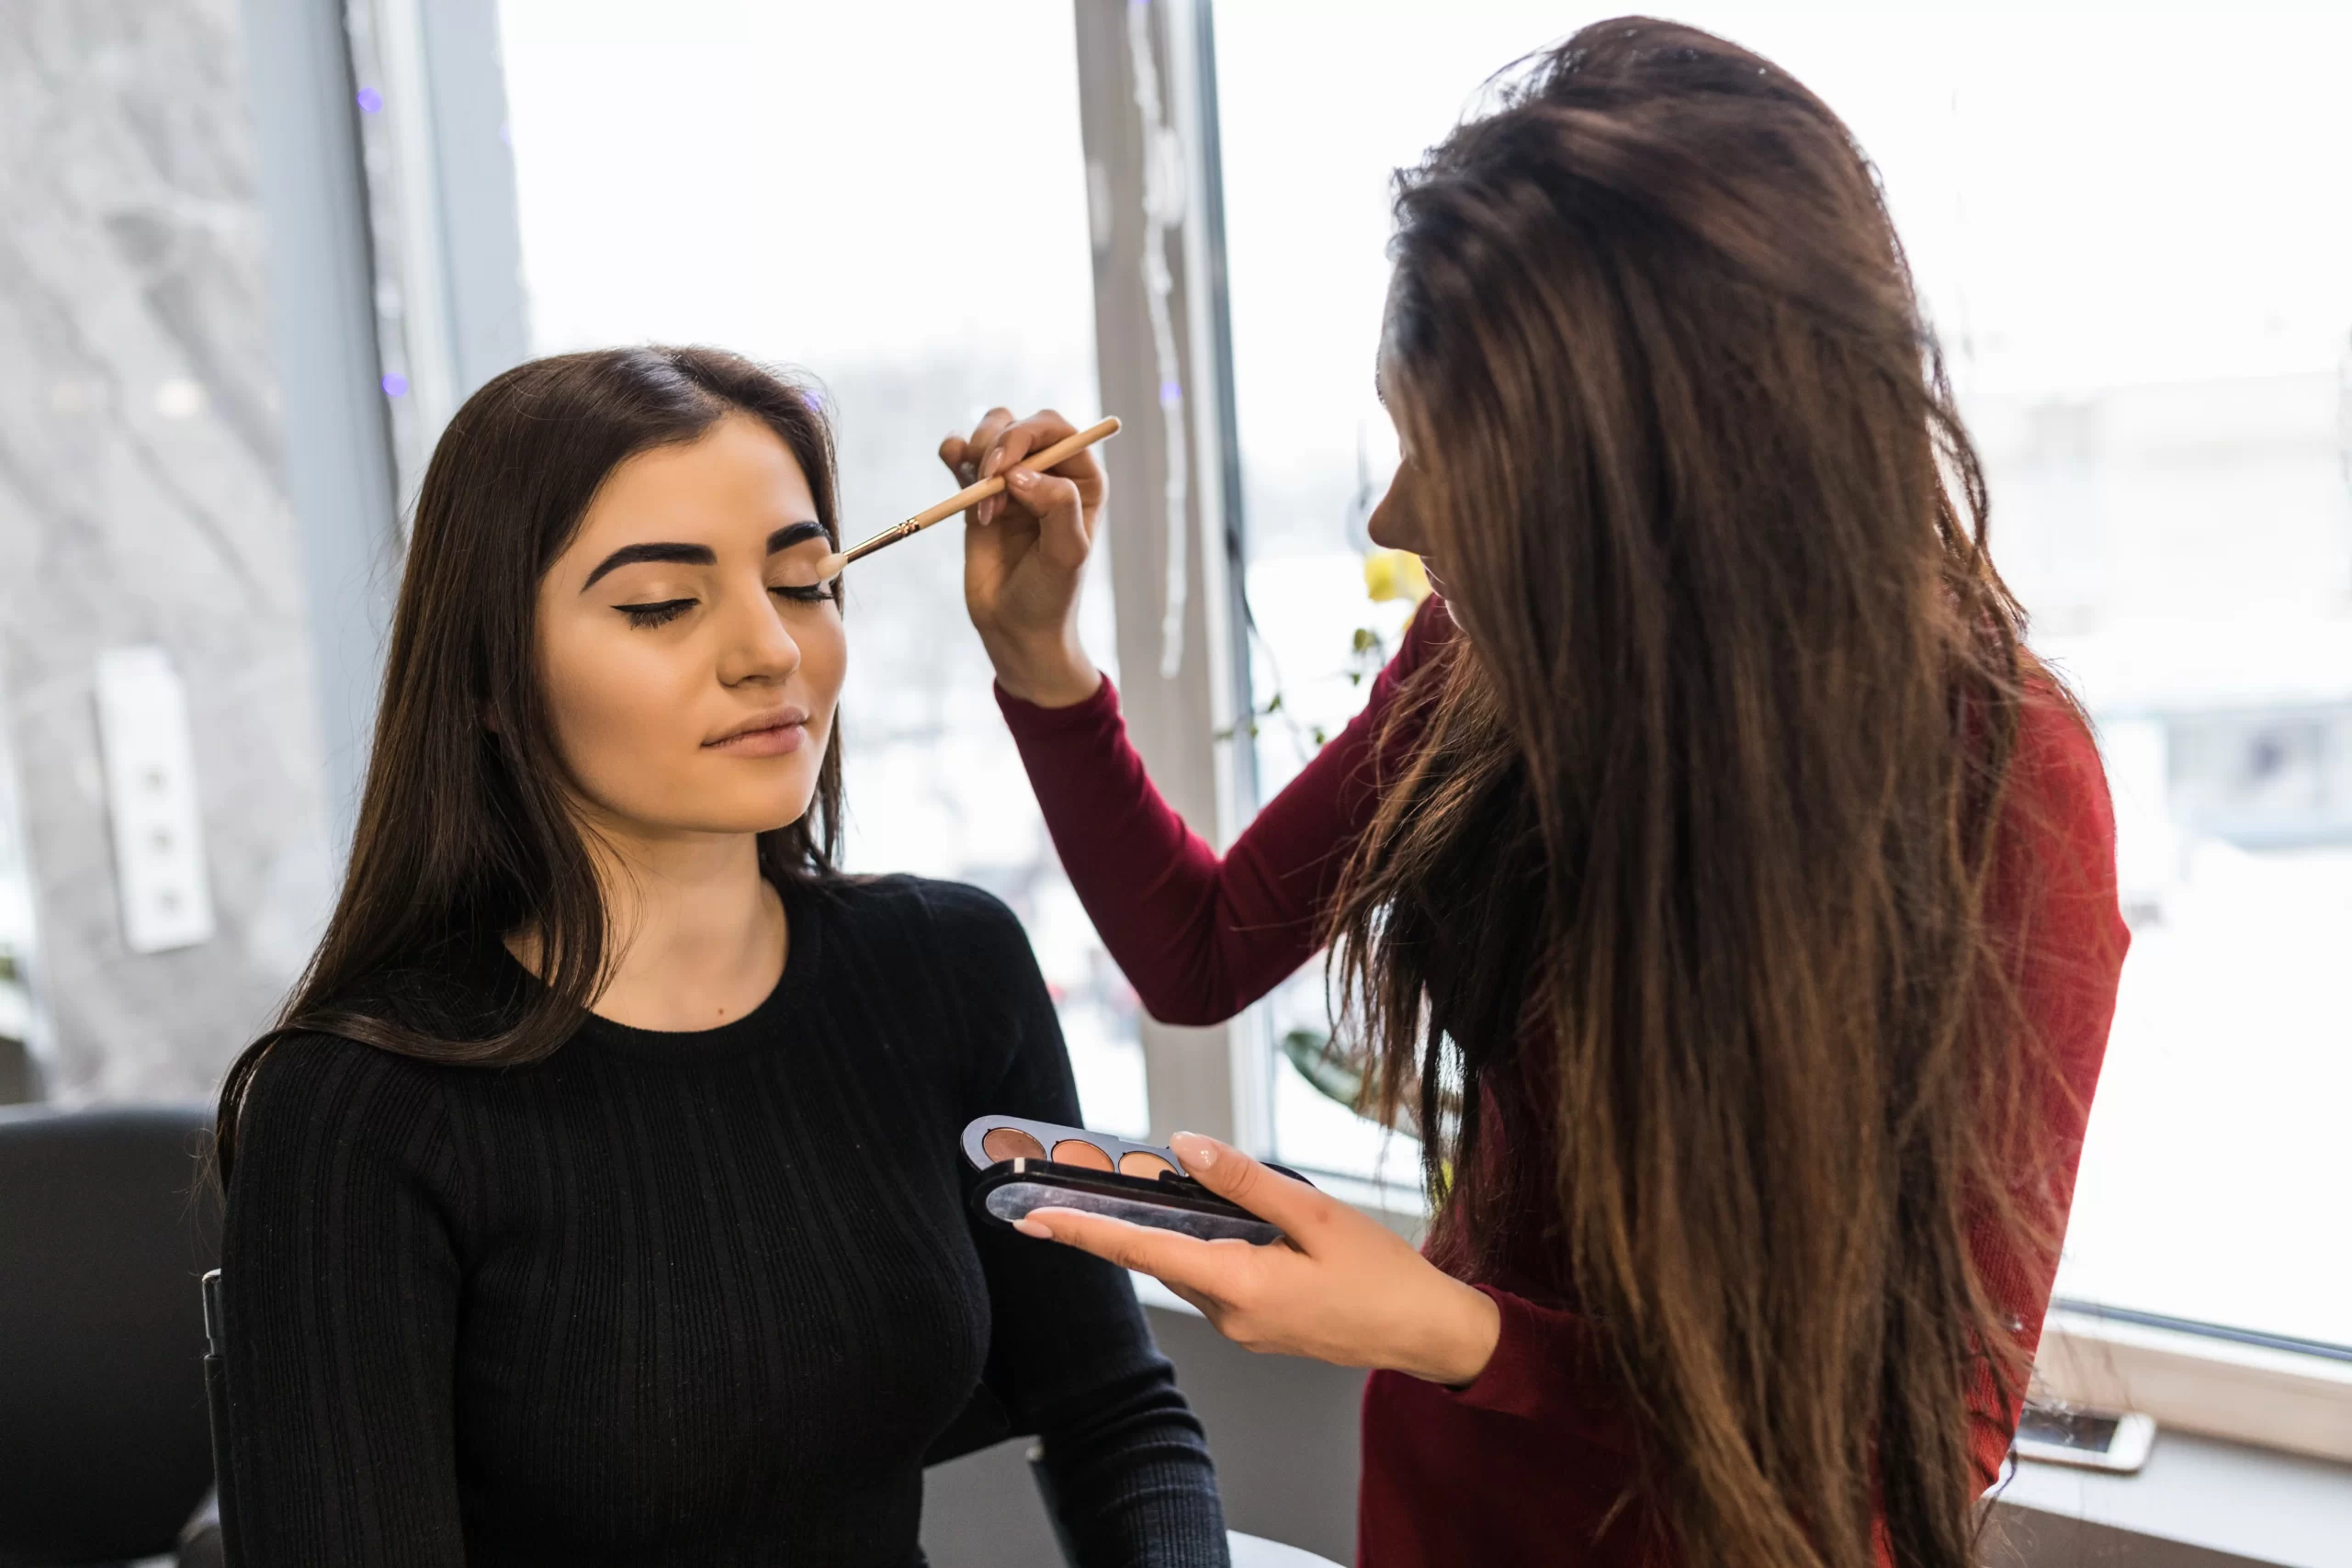 hair and makeup course